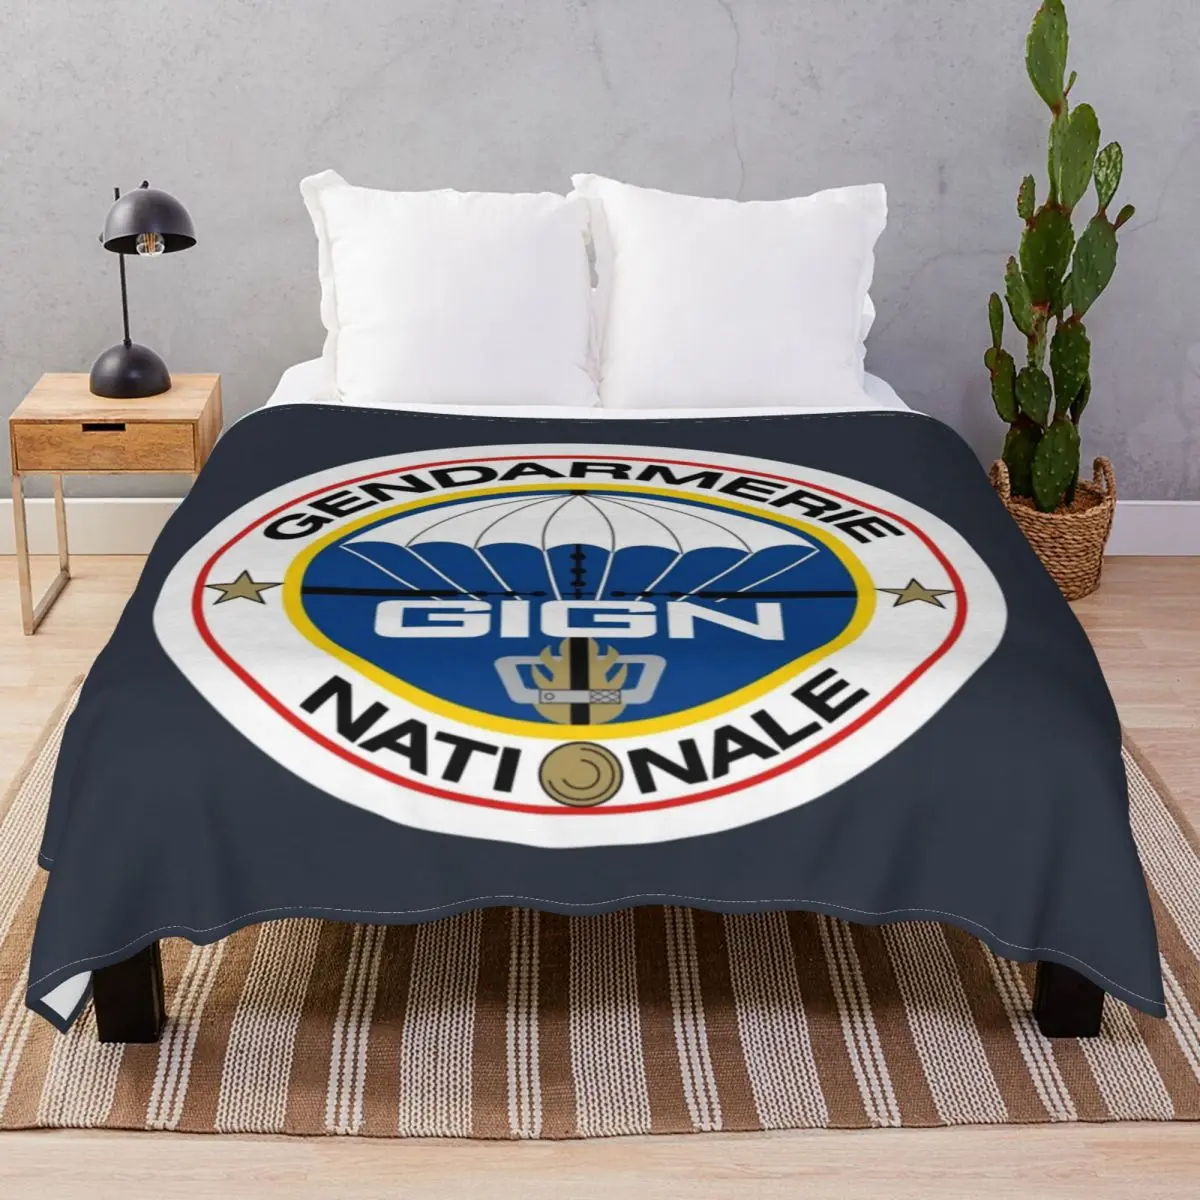 GIGN Logo Blanket Fleece Plush Decoration Multi-function Throw Blankets for Bedding Home Couch Travel Office